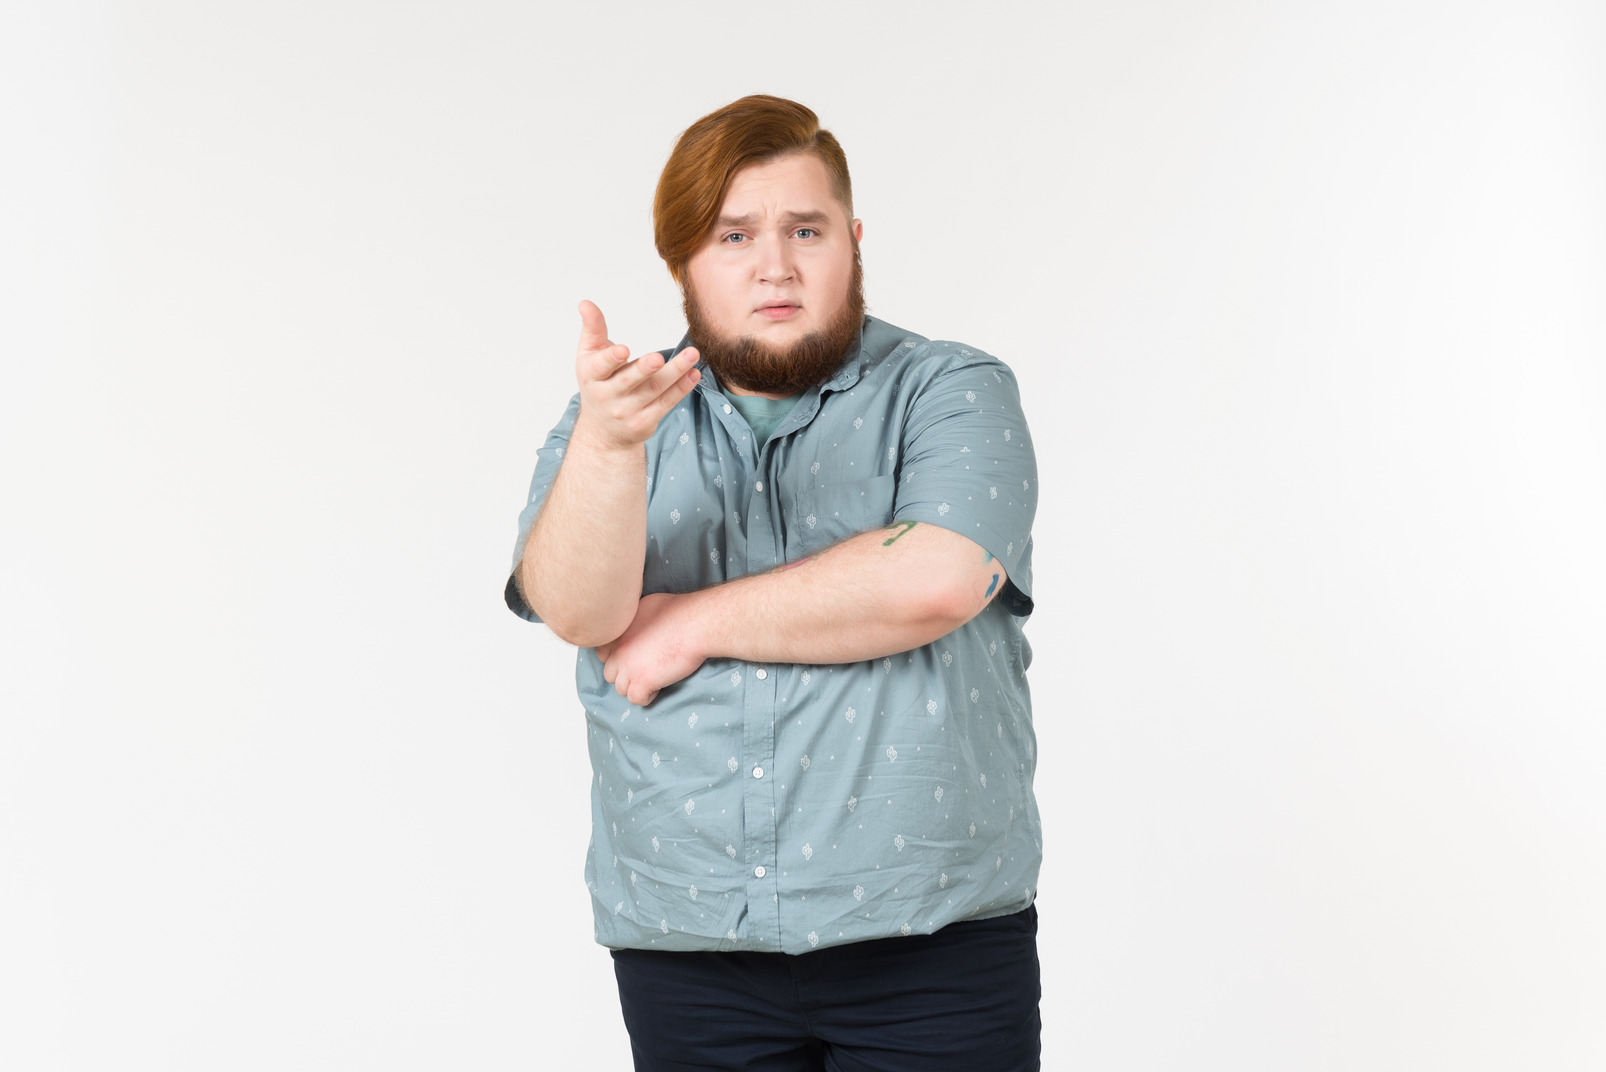 Pensive looking young overweight man standing with his hands crossed